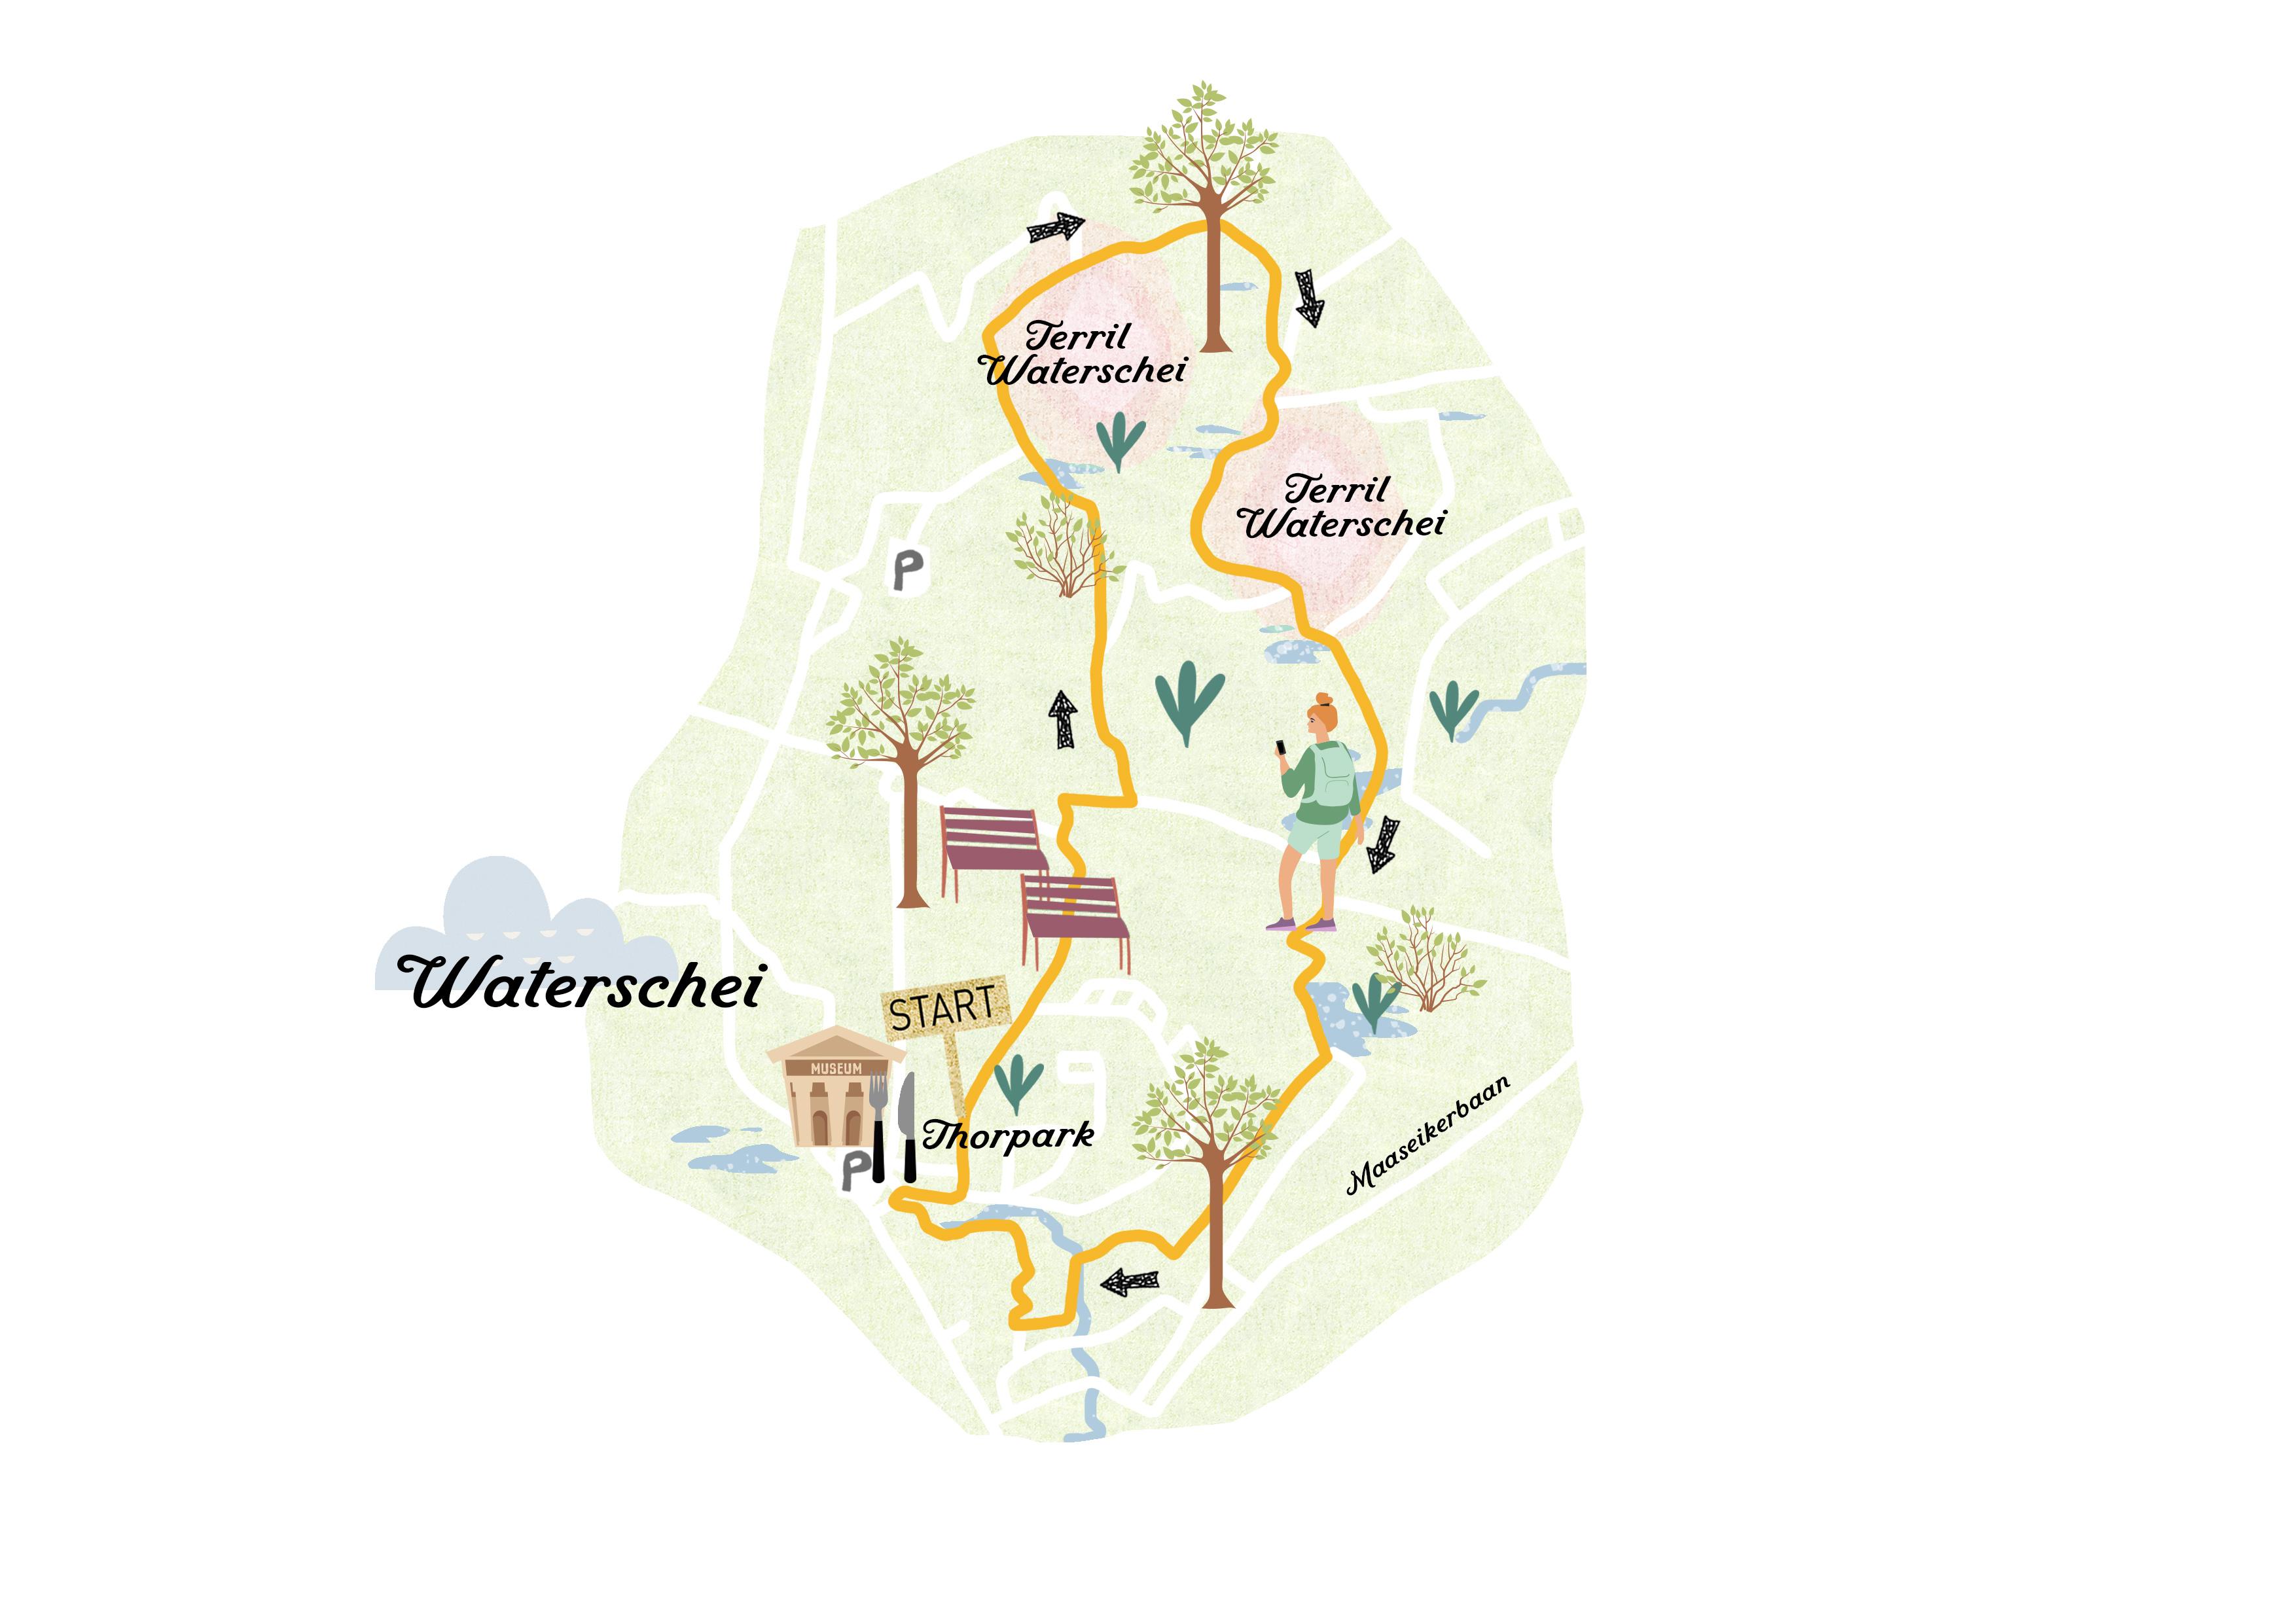 wandelroute thorpark